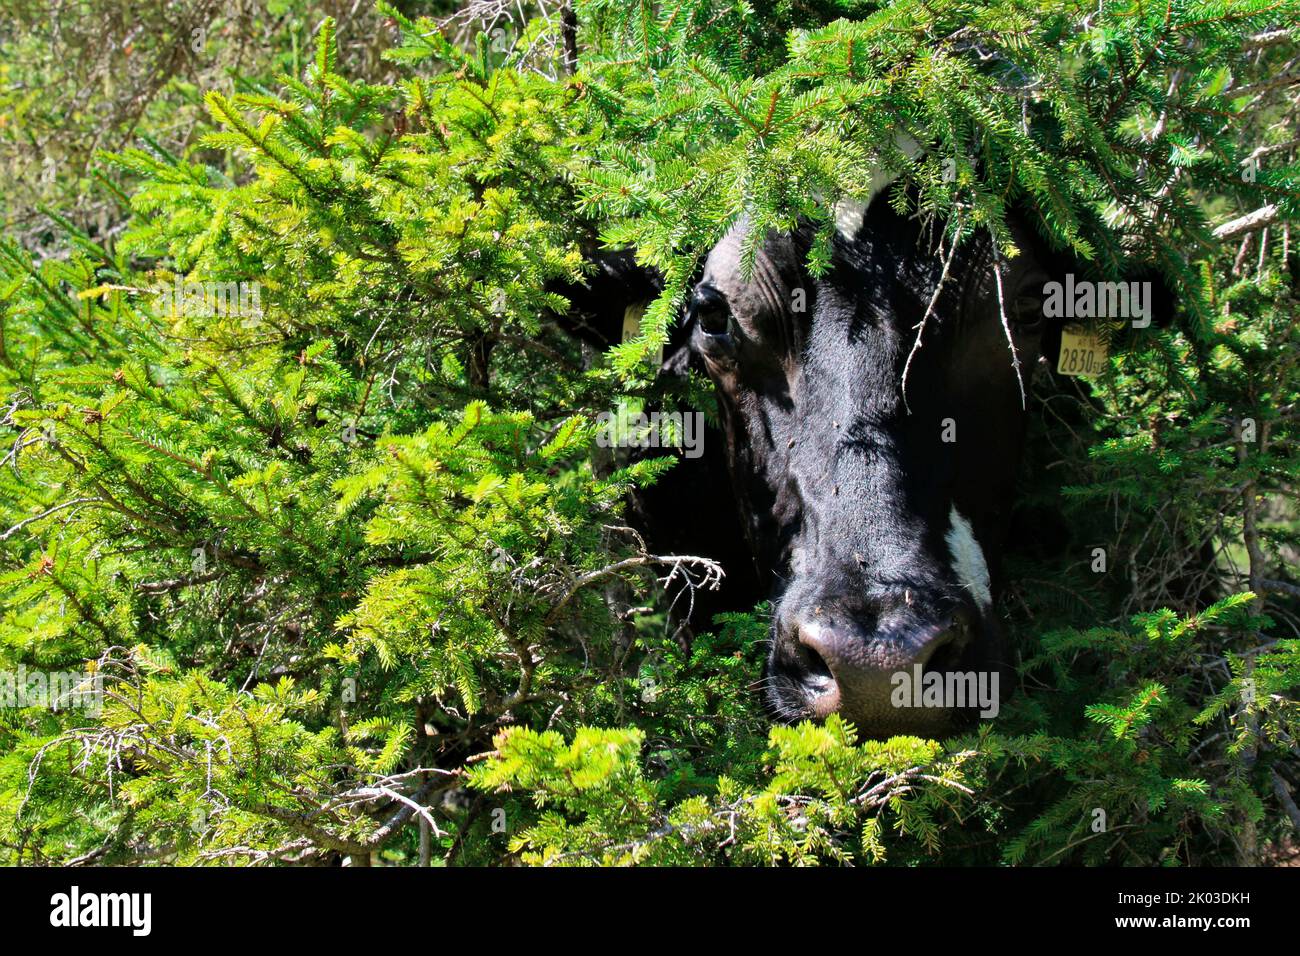 Cow, Holstein breed, hiding in bushes, looking for shade from the sun, Eppzirler Alm, Zirl, Tyrol, Austria Stock Photo